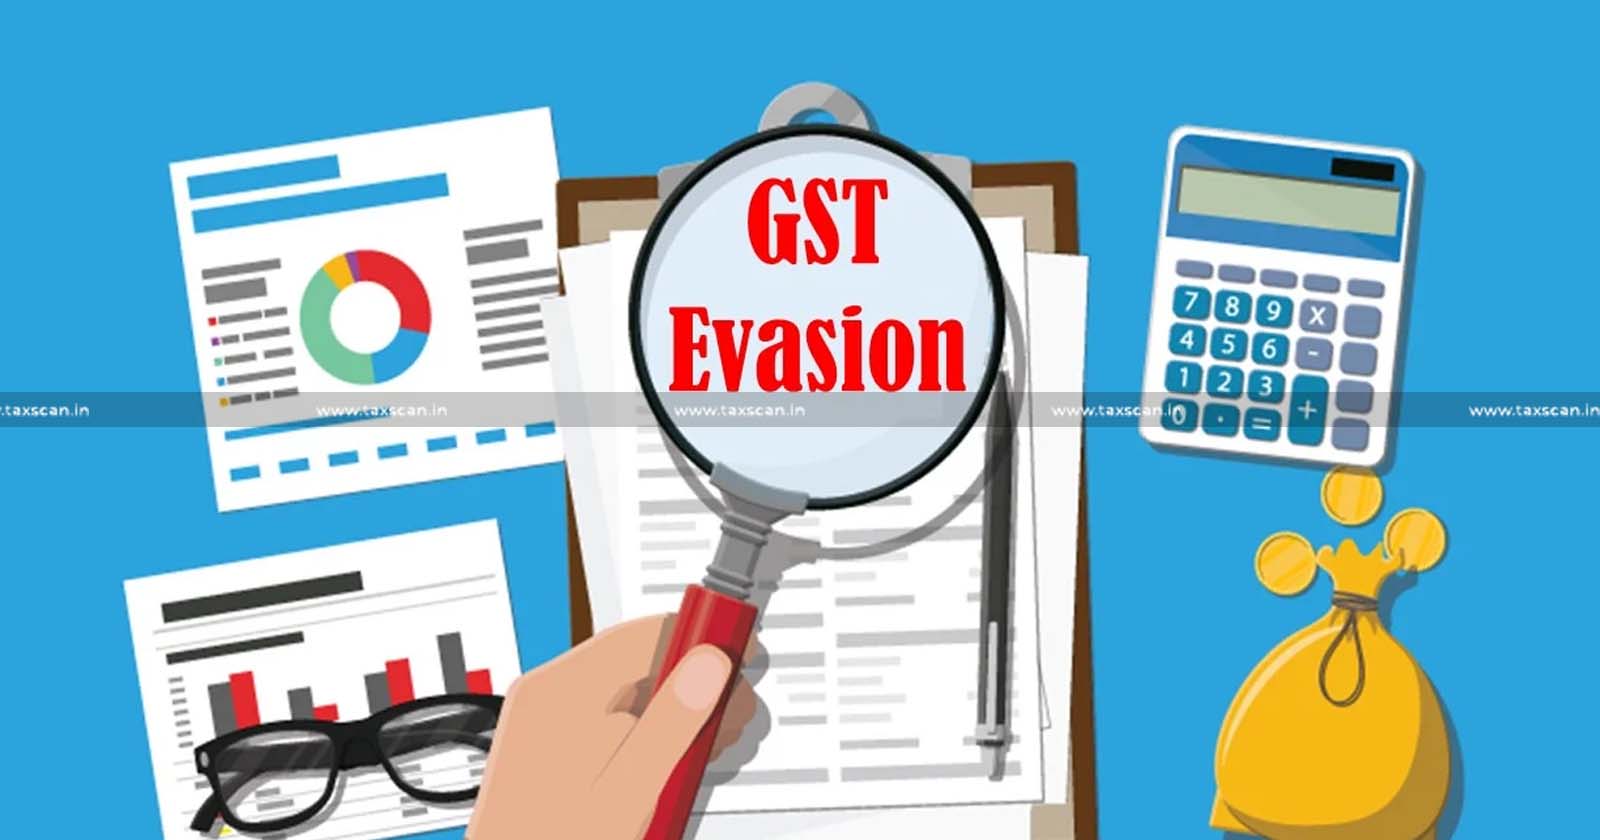 Two Mumbai Customs Officers Defrauds - Business man for settling GST evasion -Customs Officers Defrauds -GST evasion - taxscan